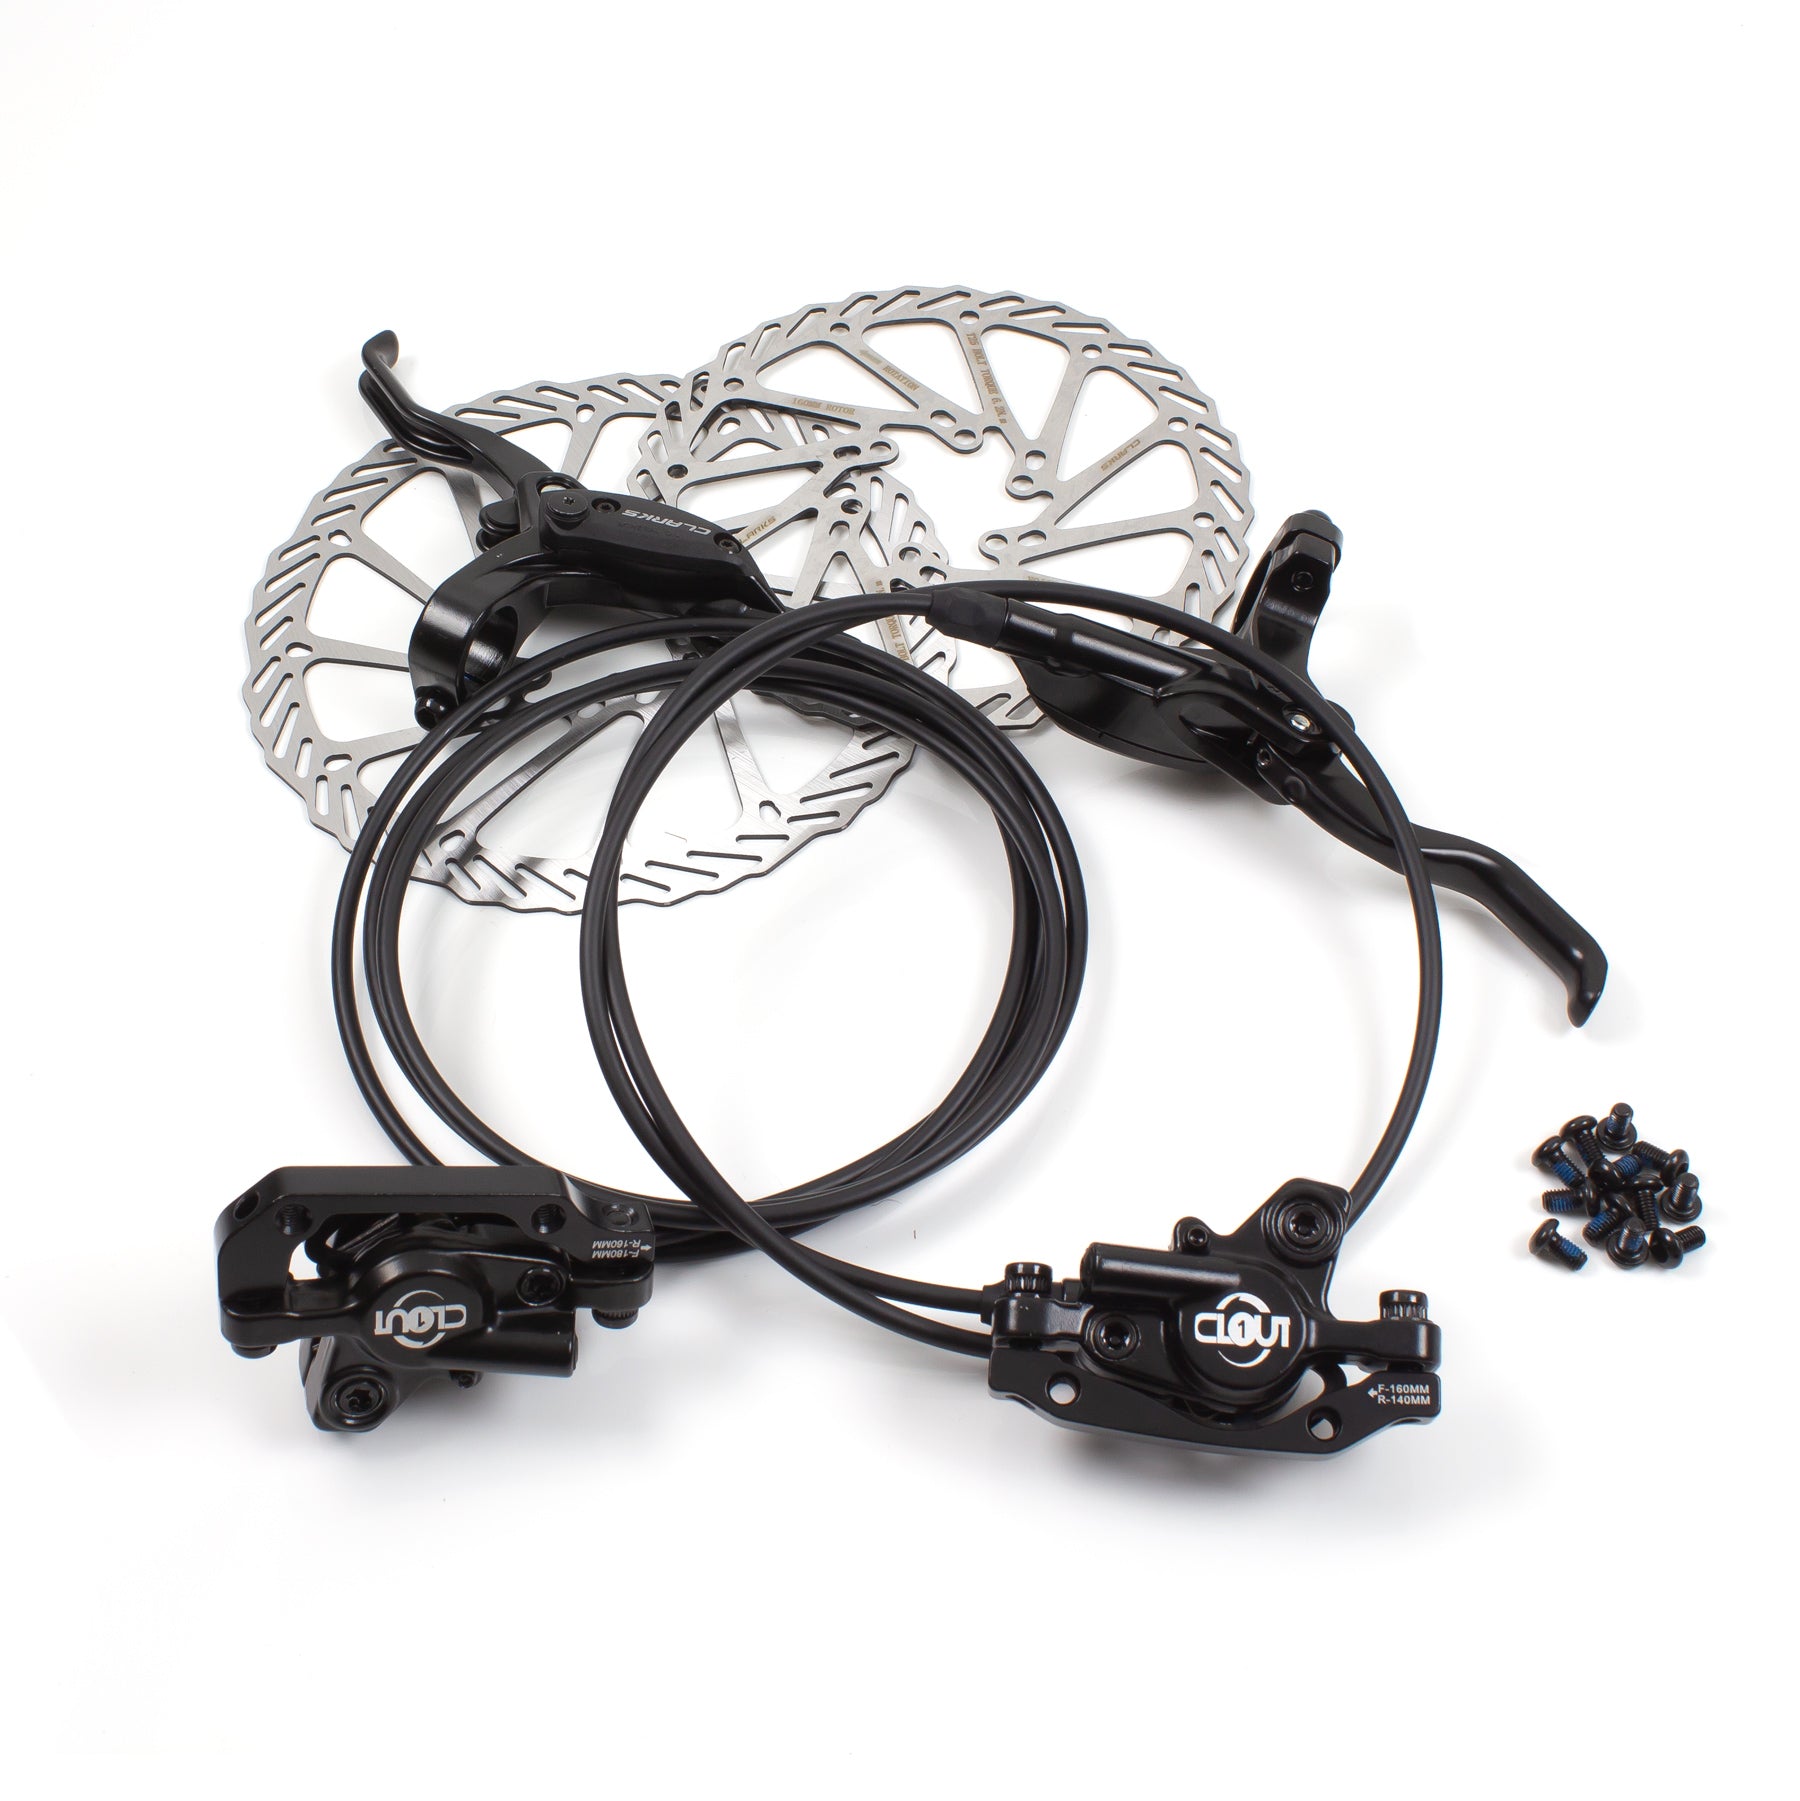 View Clarks Clout Hydraulic disc brake set 160mm front and rear information